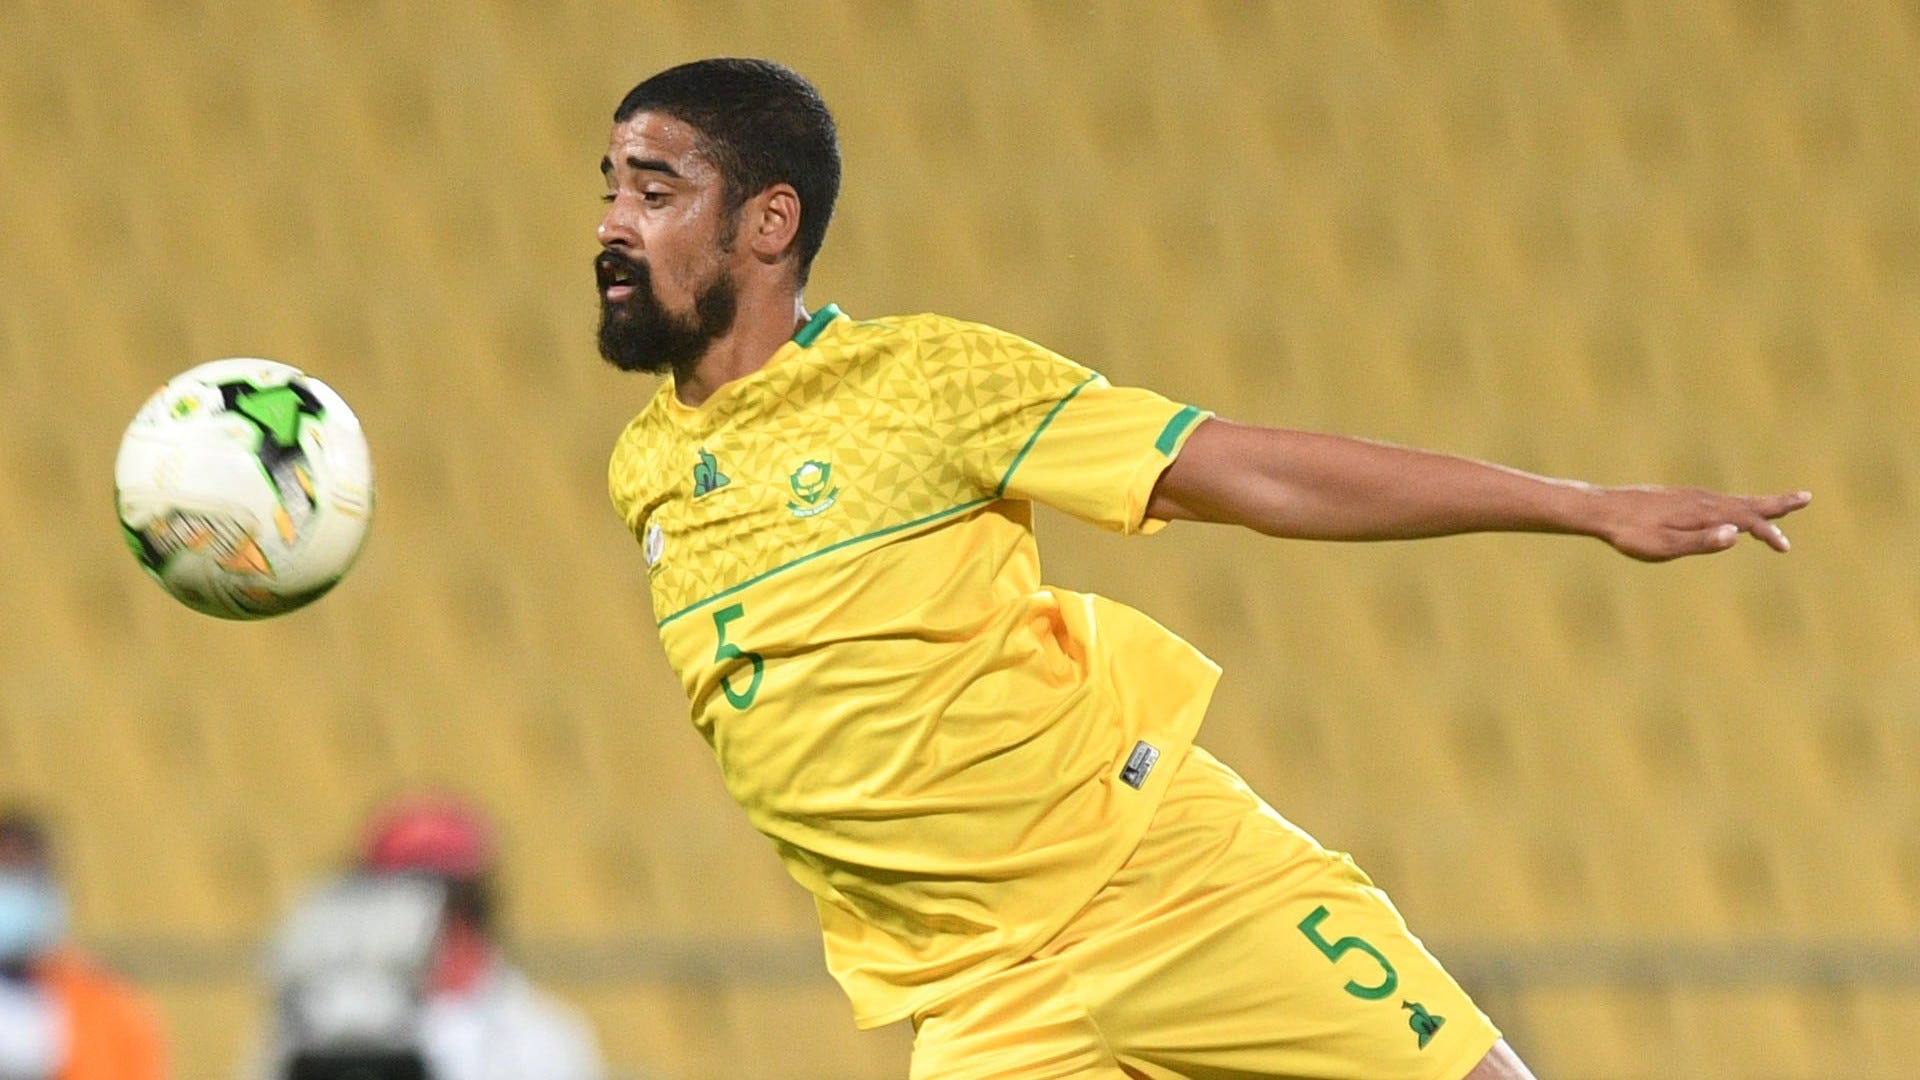 Cape Town City confirm the signing of Abbubaker Mobara from Orlando Pirates